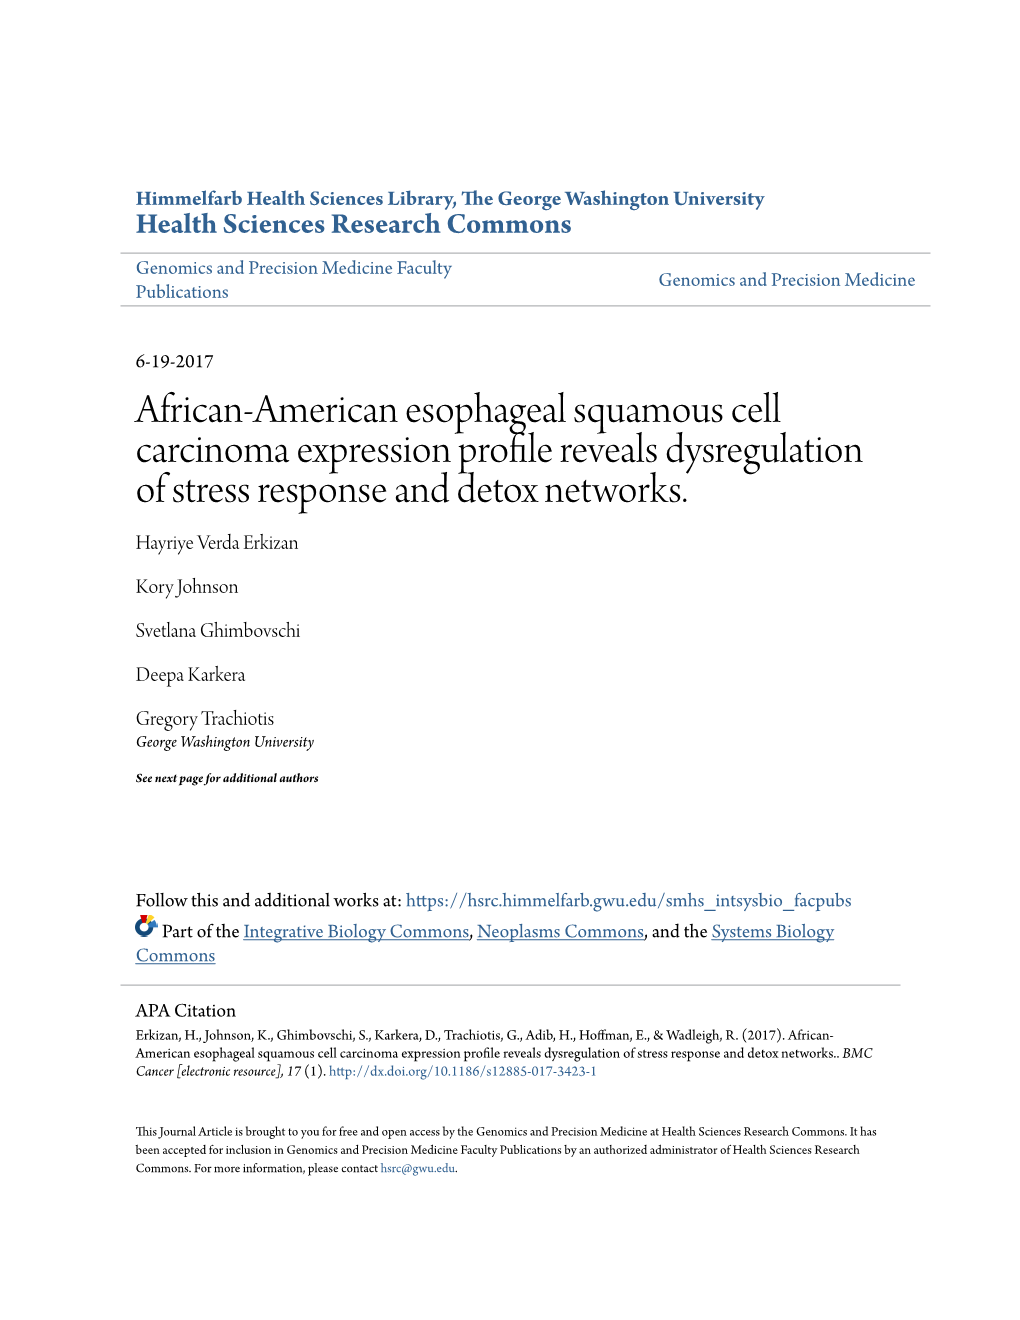 African-American Esophageal Squamous Cell Carcinoma Expression Profile Reveals Dysregulation of Stress Response and Detox Networks